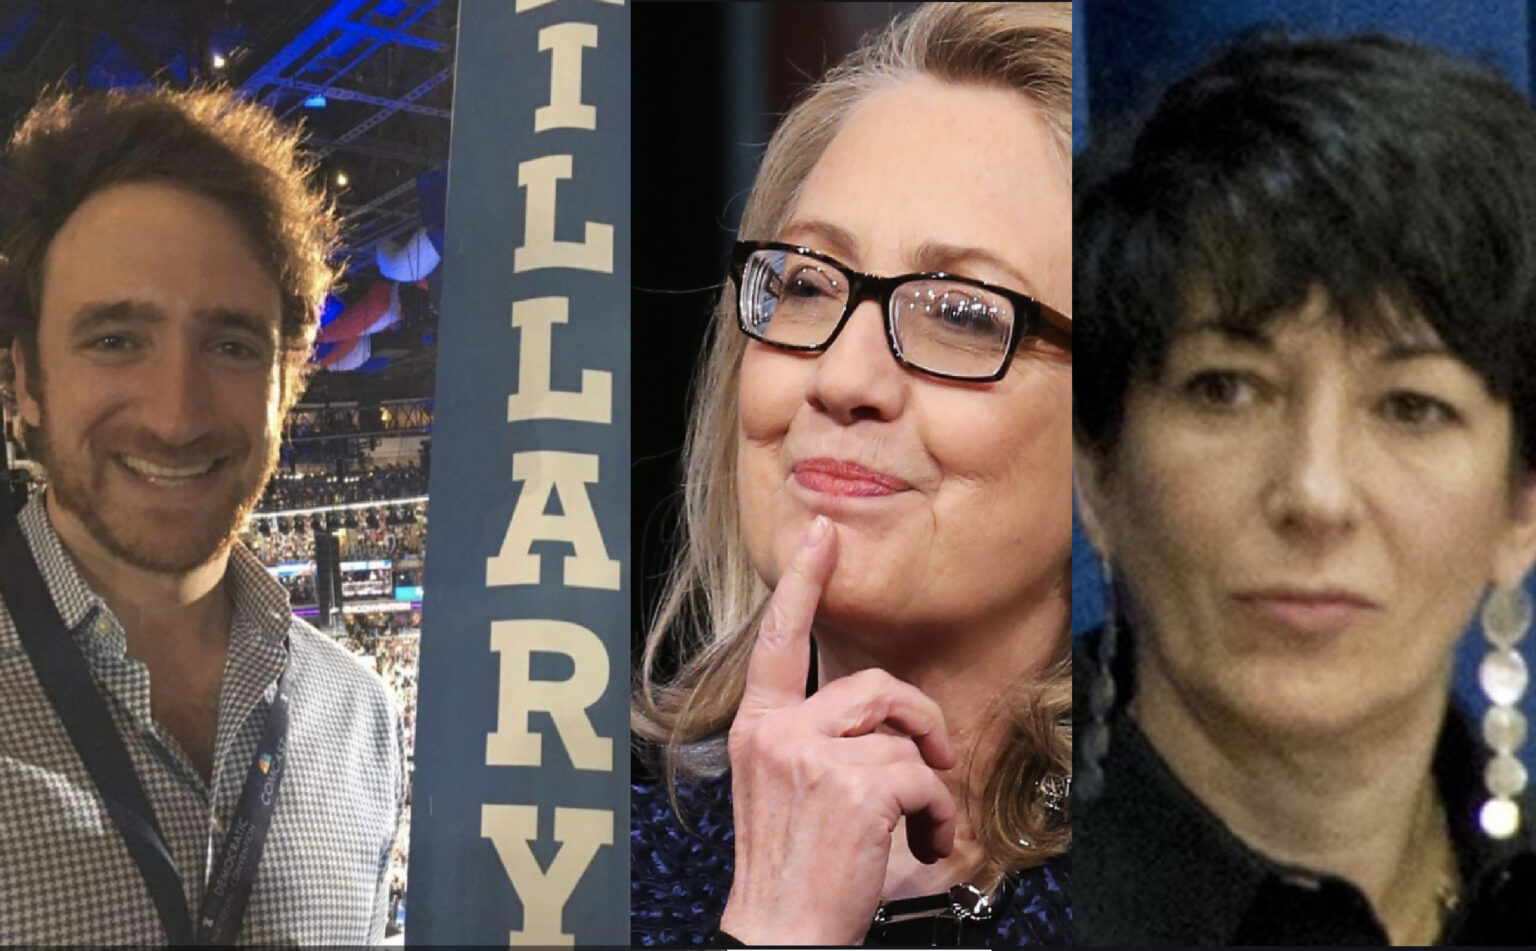 Was Ghislaine Maxwell's nephew really hired by Hillary Clinton? Explore their connection and what this could mean for the 2020 election here.